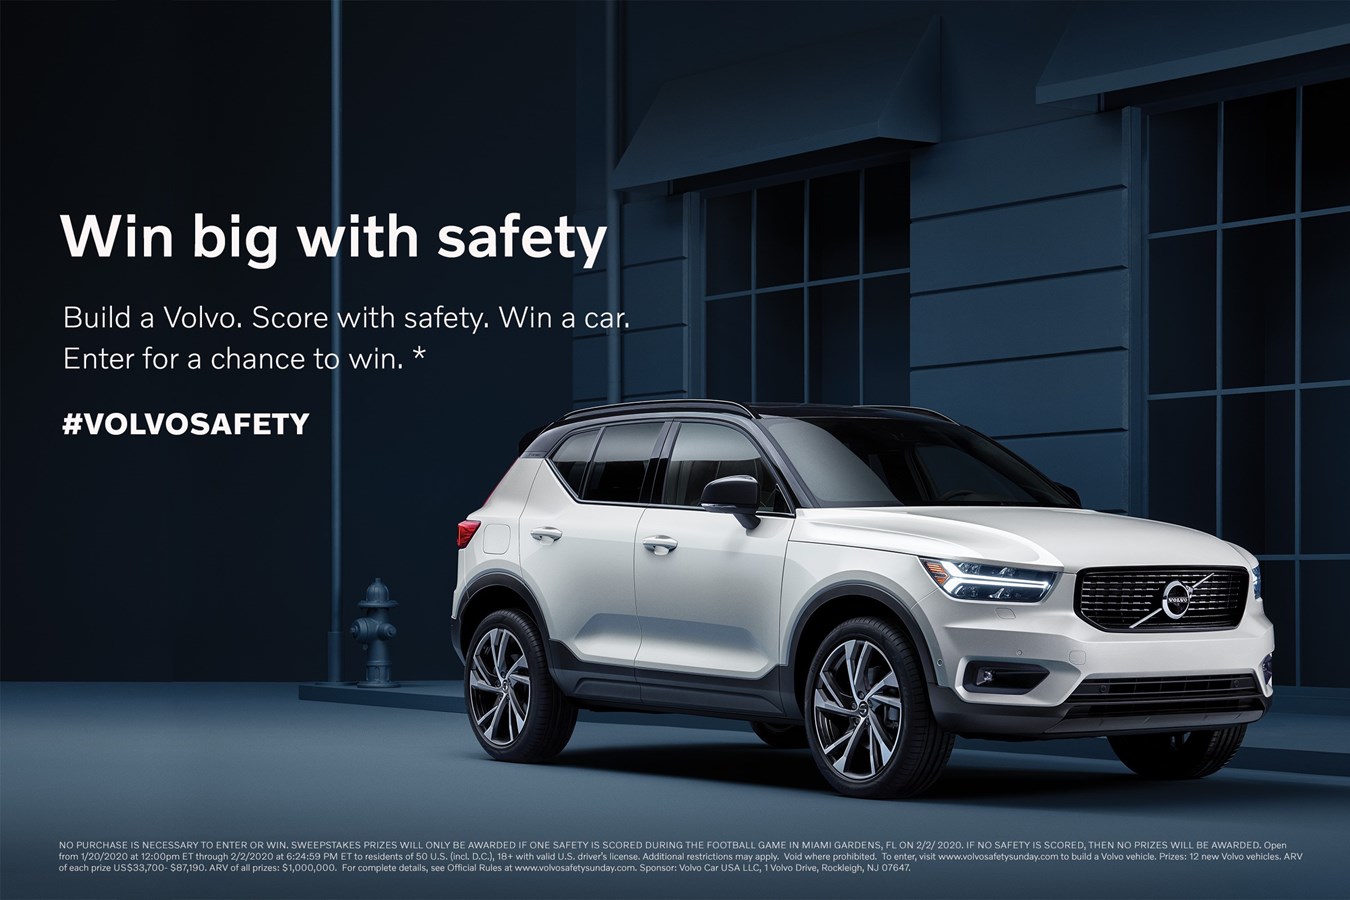 Volvo Car USA Takes Giant Strides to Improve Customer Satisfaction and Safety